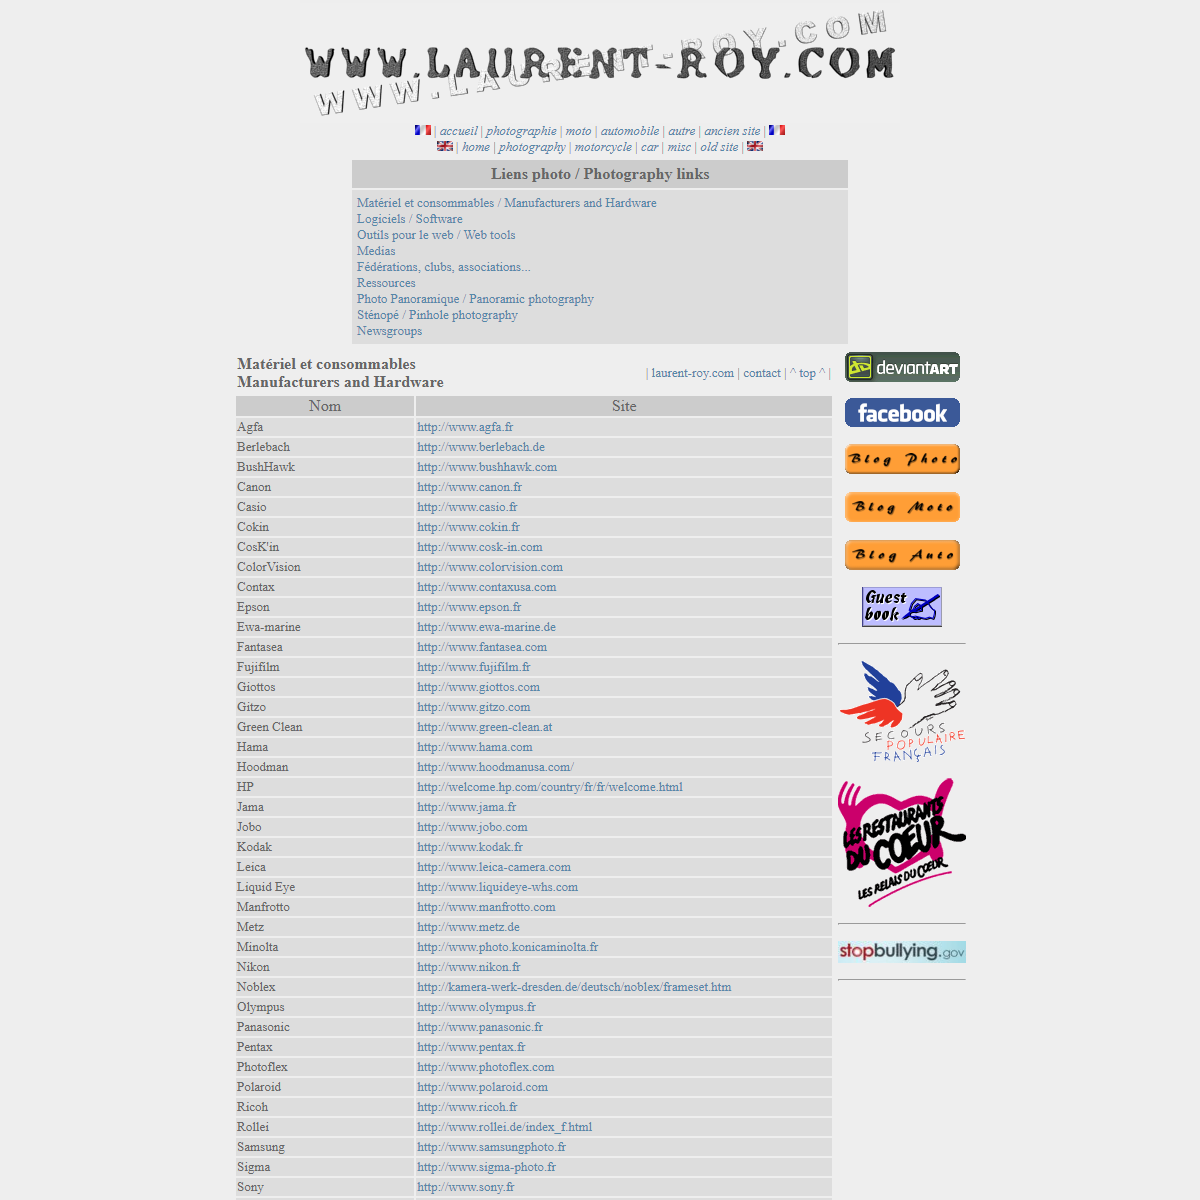 A complete backup of http://www.laurent-roy.com/photo/liens.html